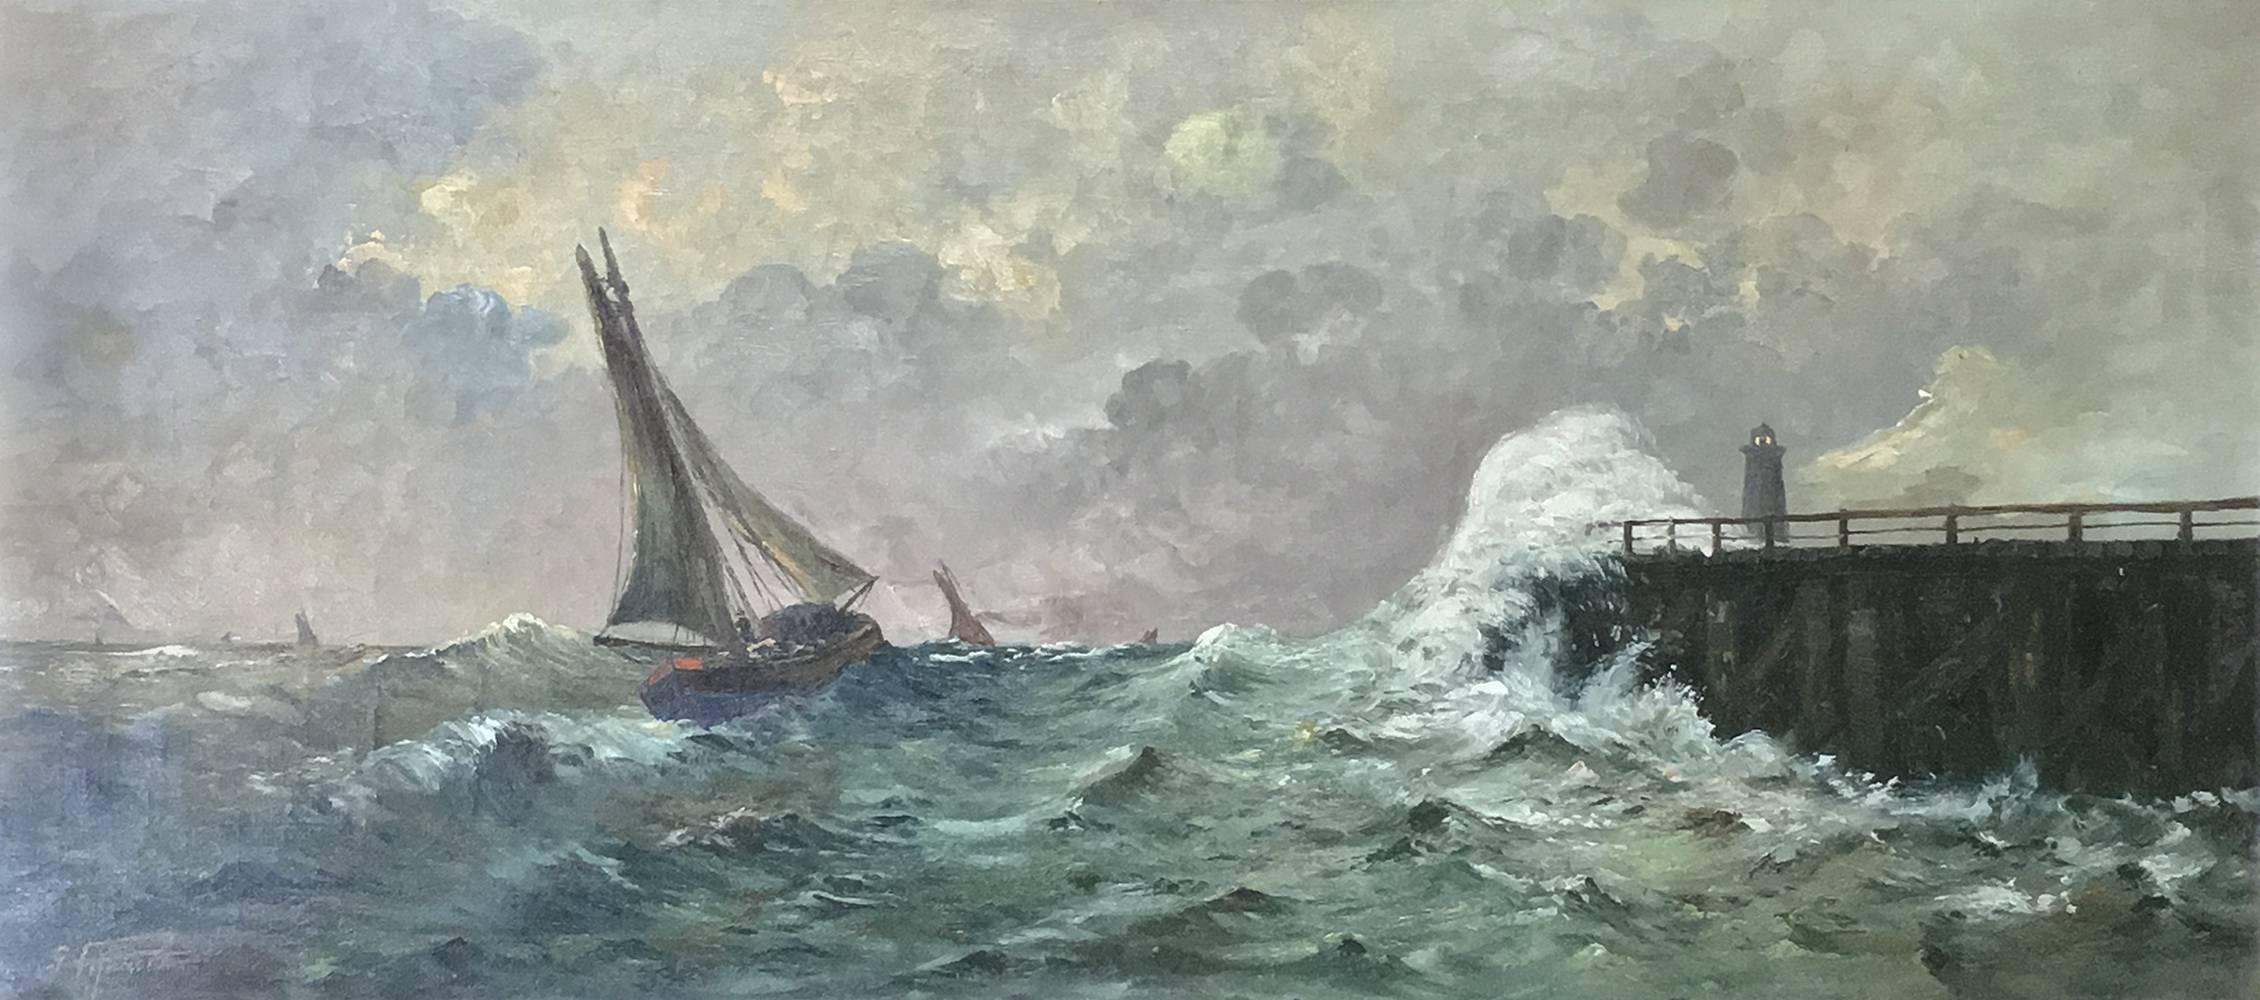 Antique framed oil painting on canvas is a splendid nautical scene depicting a fishing vessel returning to the docks after a squall has roughed up the sea. Only with the best of skill and luck could they navigate their small sailboats past the